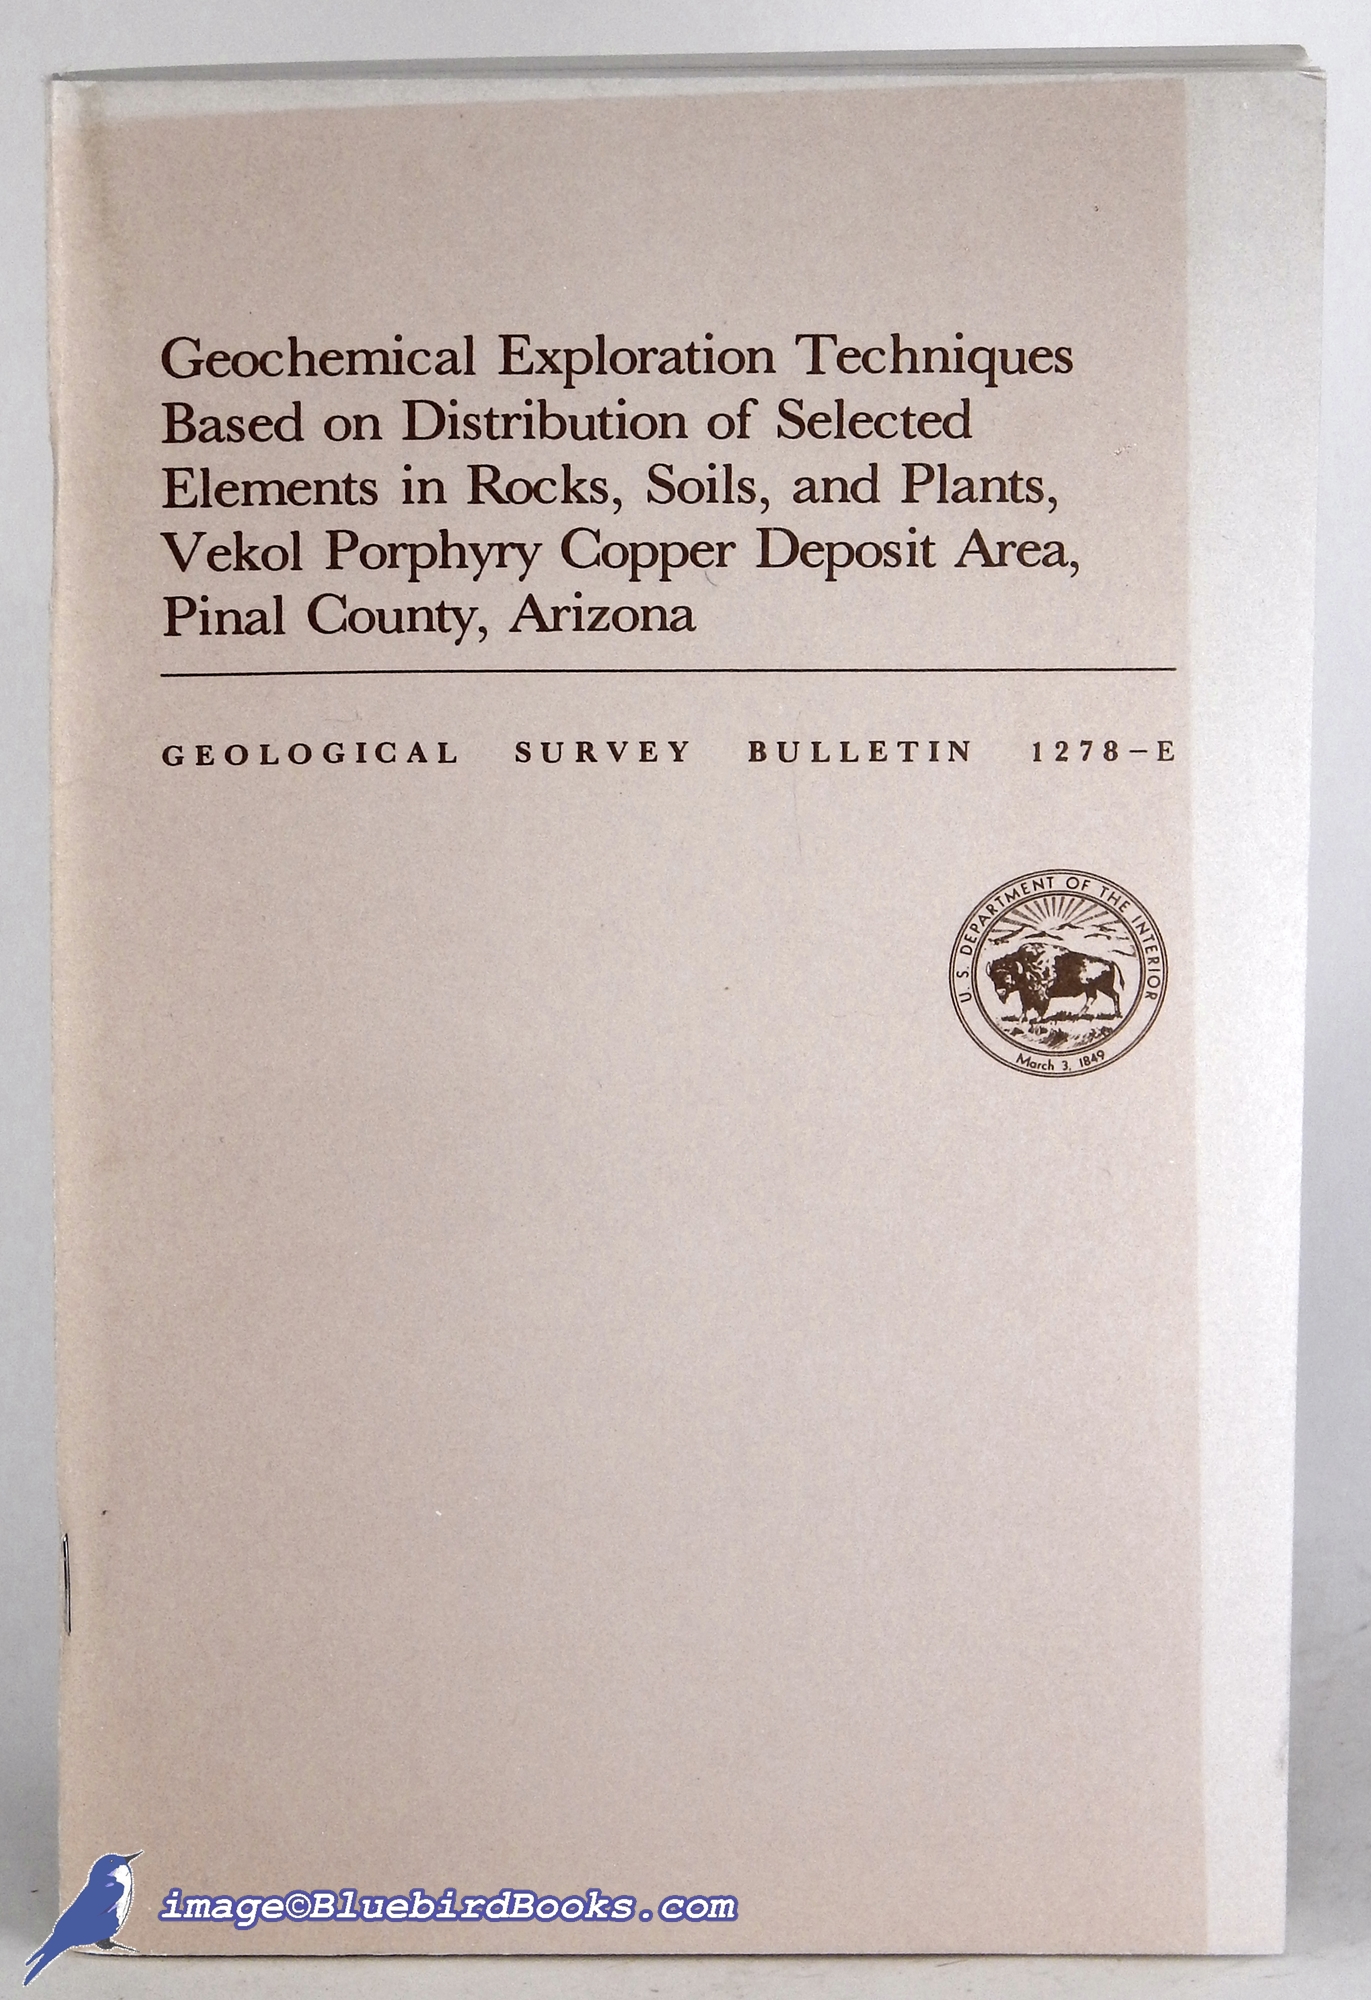 CHAFFEE, MAURICE A. - Geochemical Exploration Techniques Based on Distribution of Selected Elements in Rocks, Soils, and Plants, Vekol Porphyry Copper Deposit Area, Pinal County, Arizona (Usgs Bulletin 1278-E)